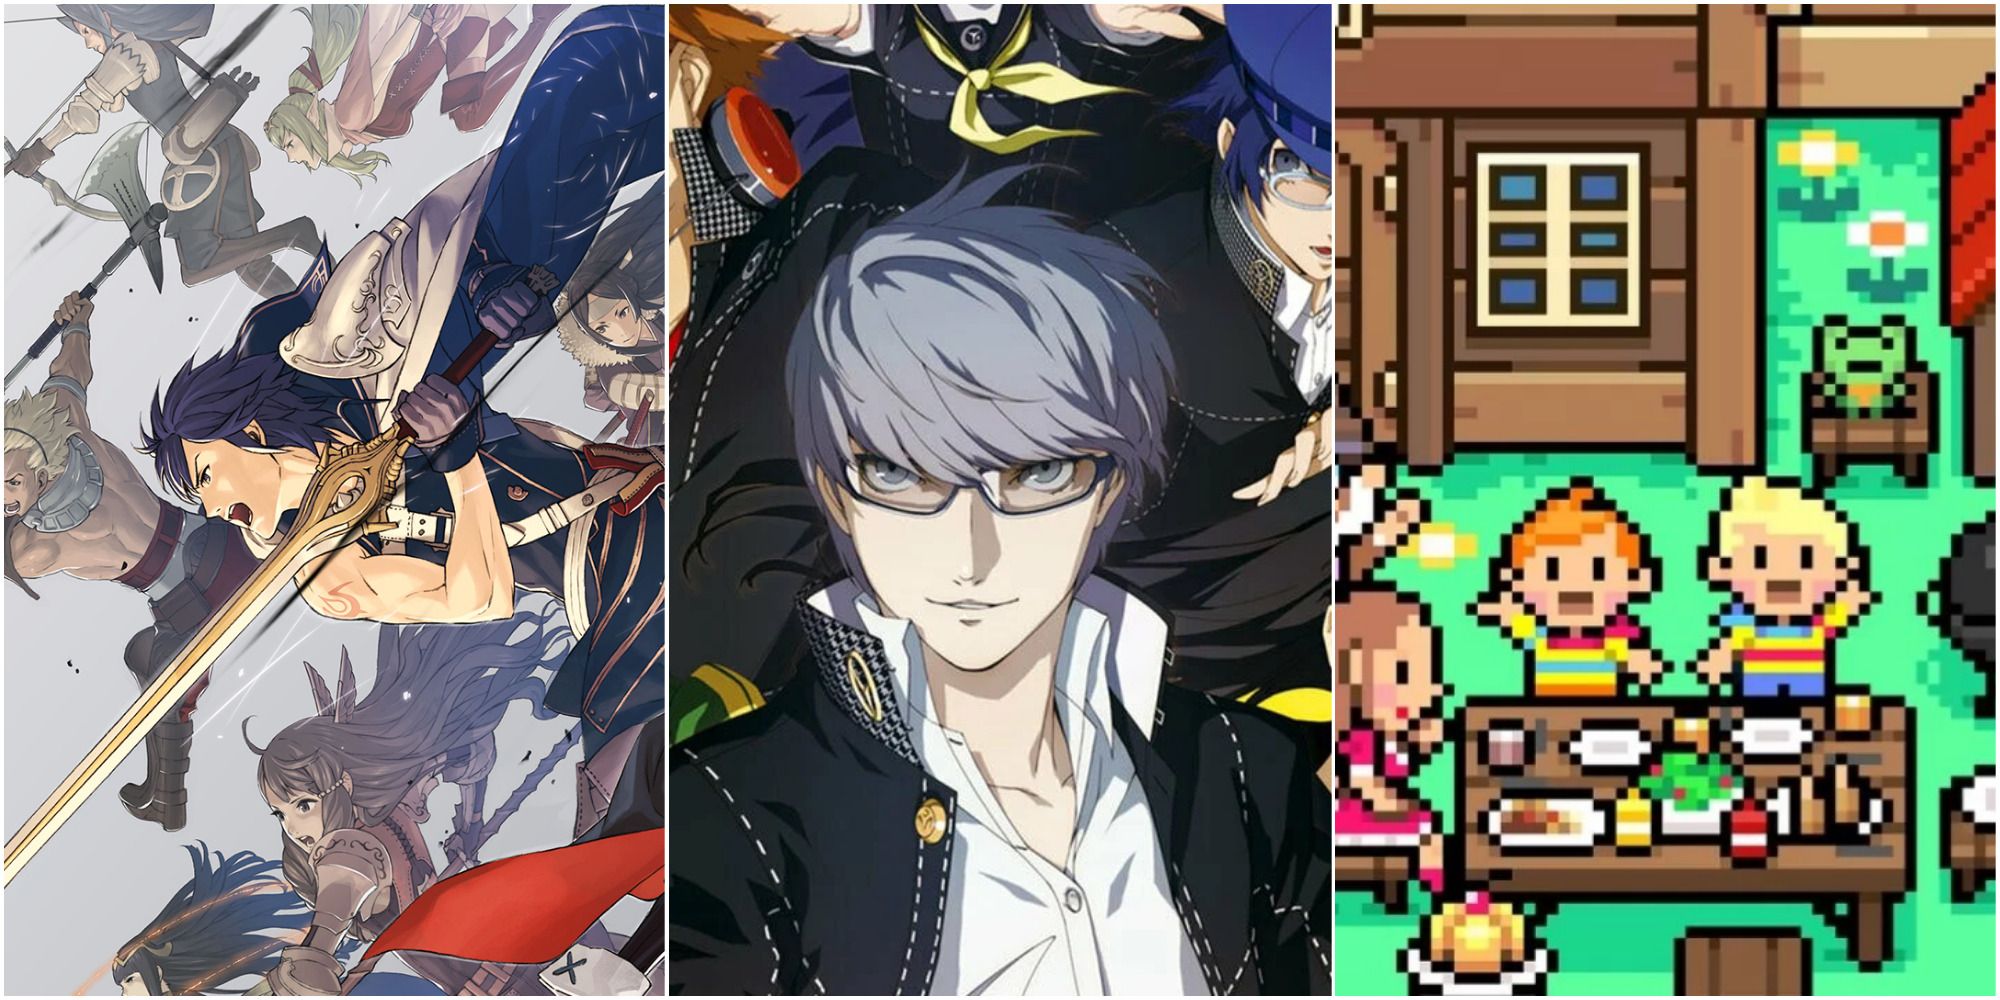 A collage of images from Fire Emblem: Awakening, Persona 4 Golden, and Mother 3